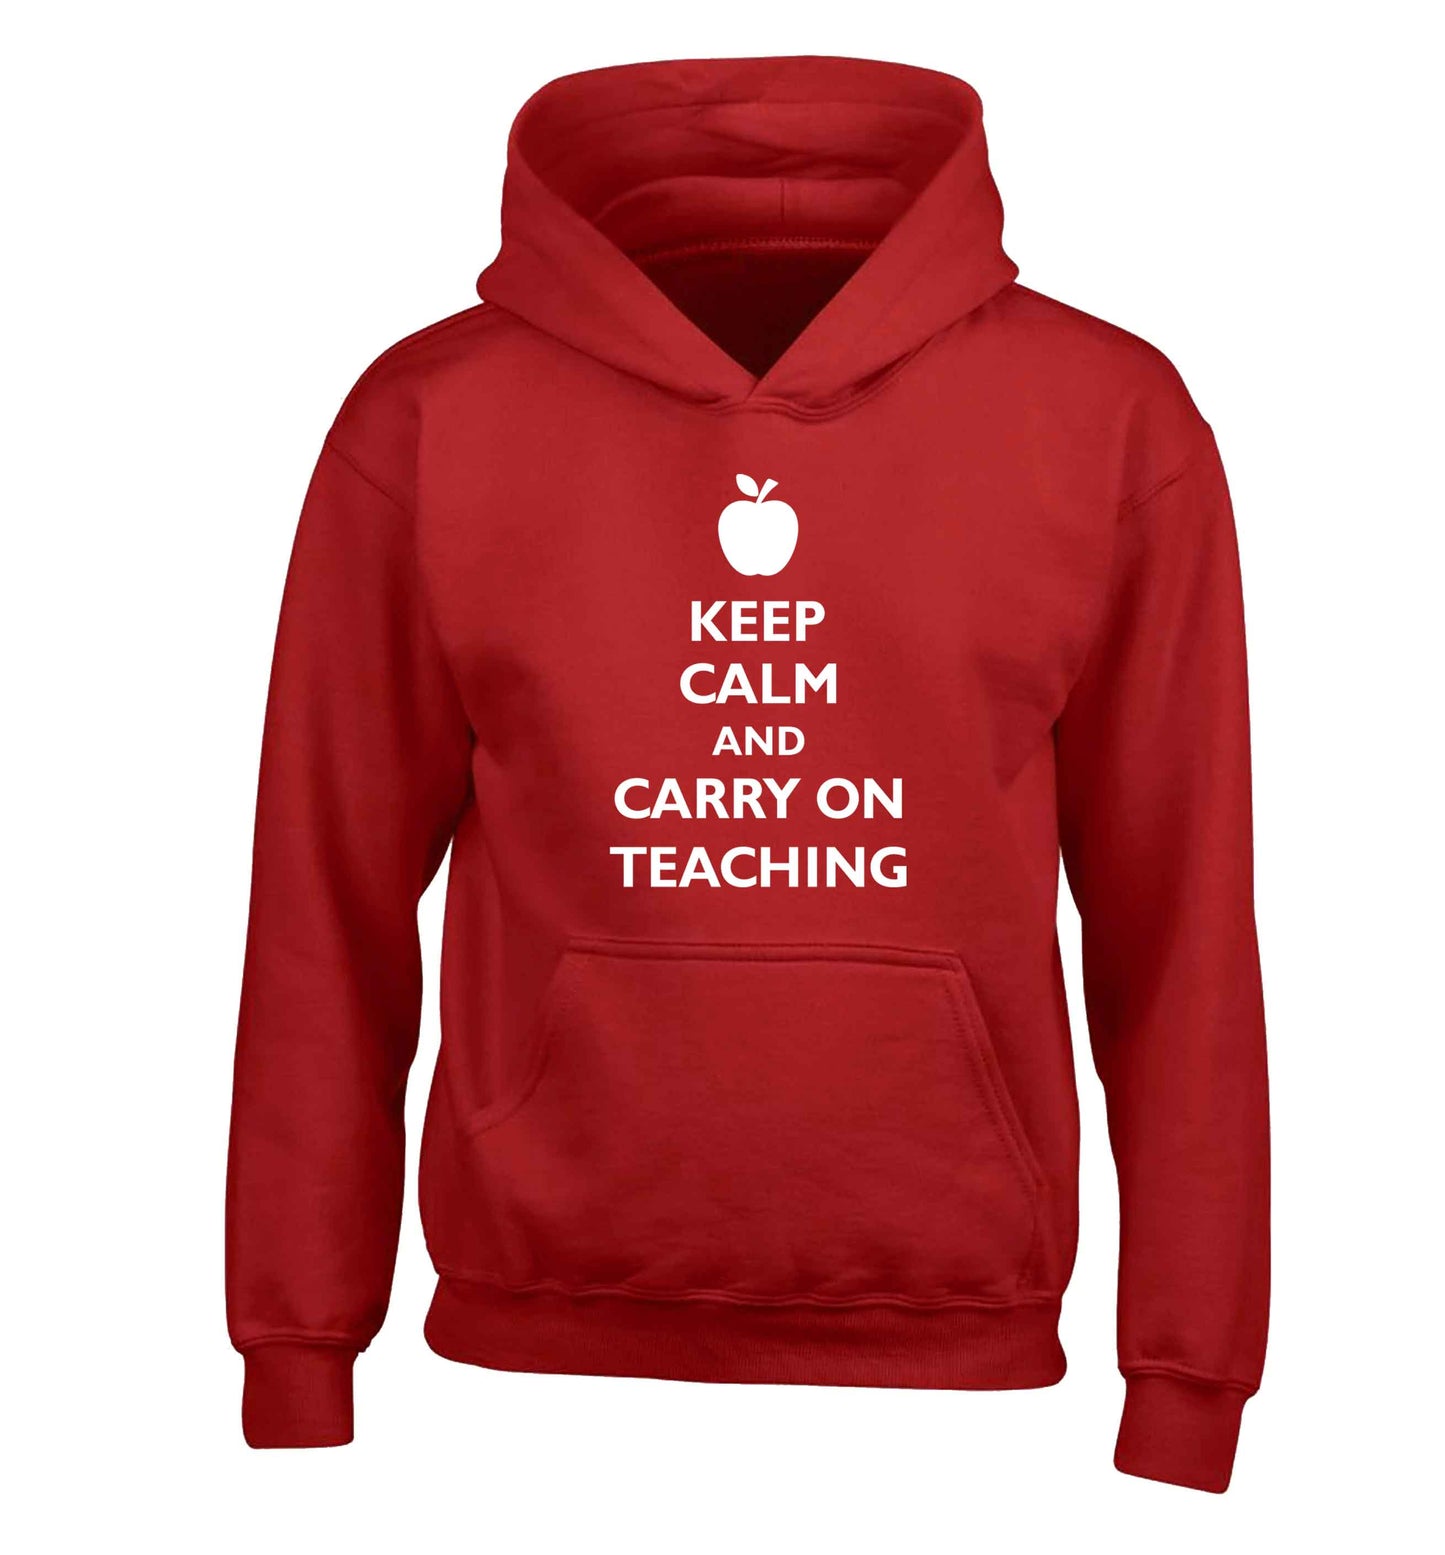 Keep calm and carry on teaching children's red hoodie 12-13 Years